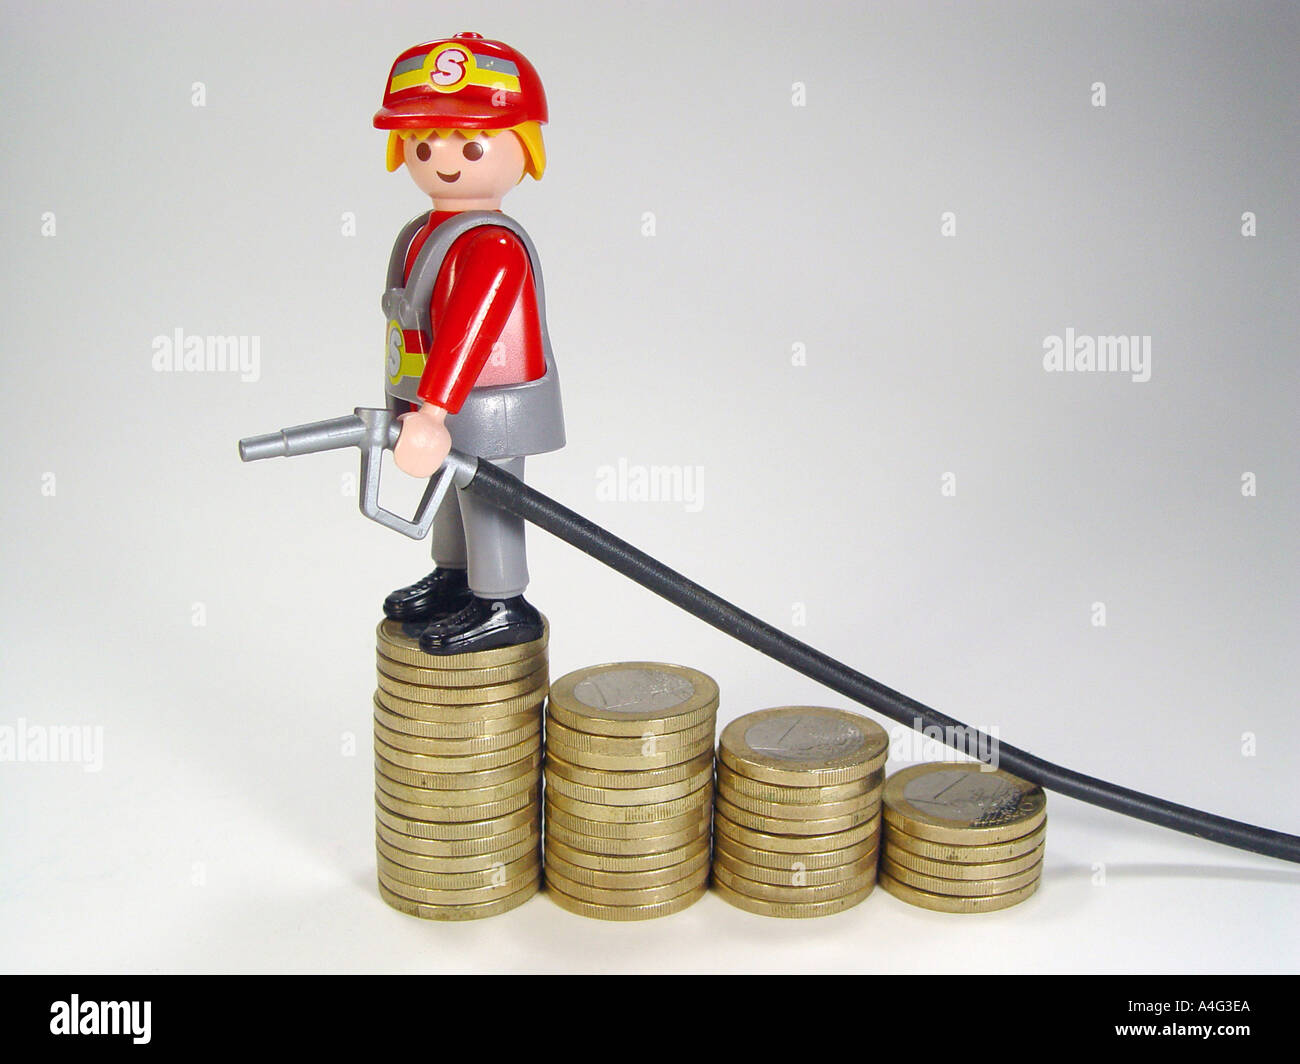 Service station attendant on a pile euro coins as symbol for the rising fuel prices Stock Photo